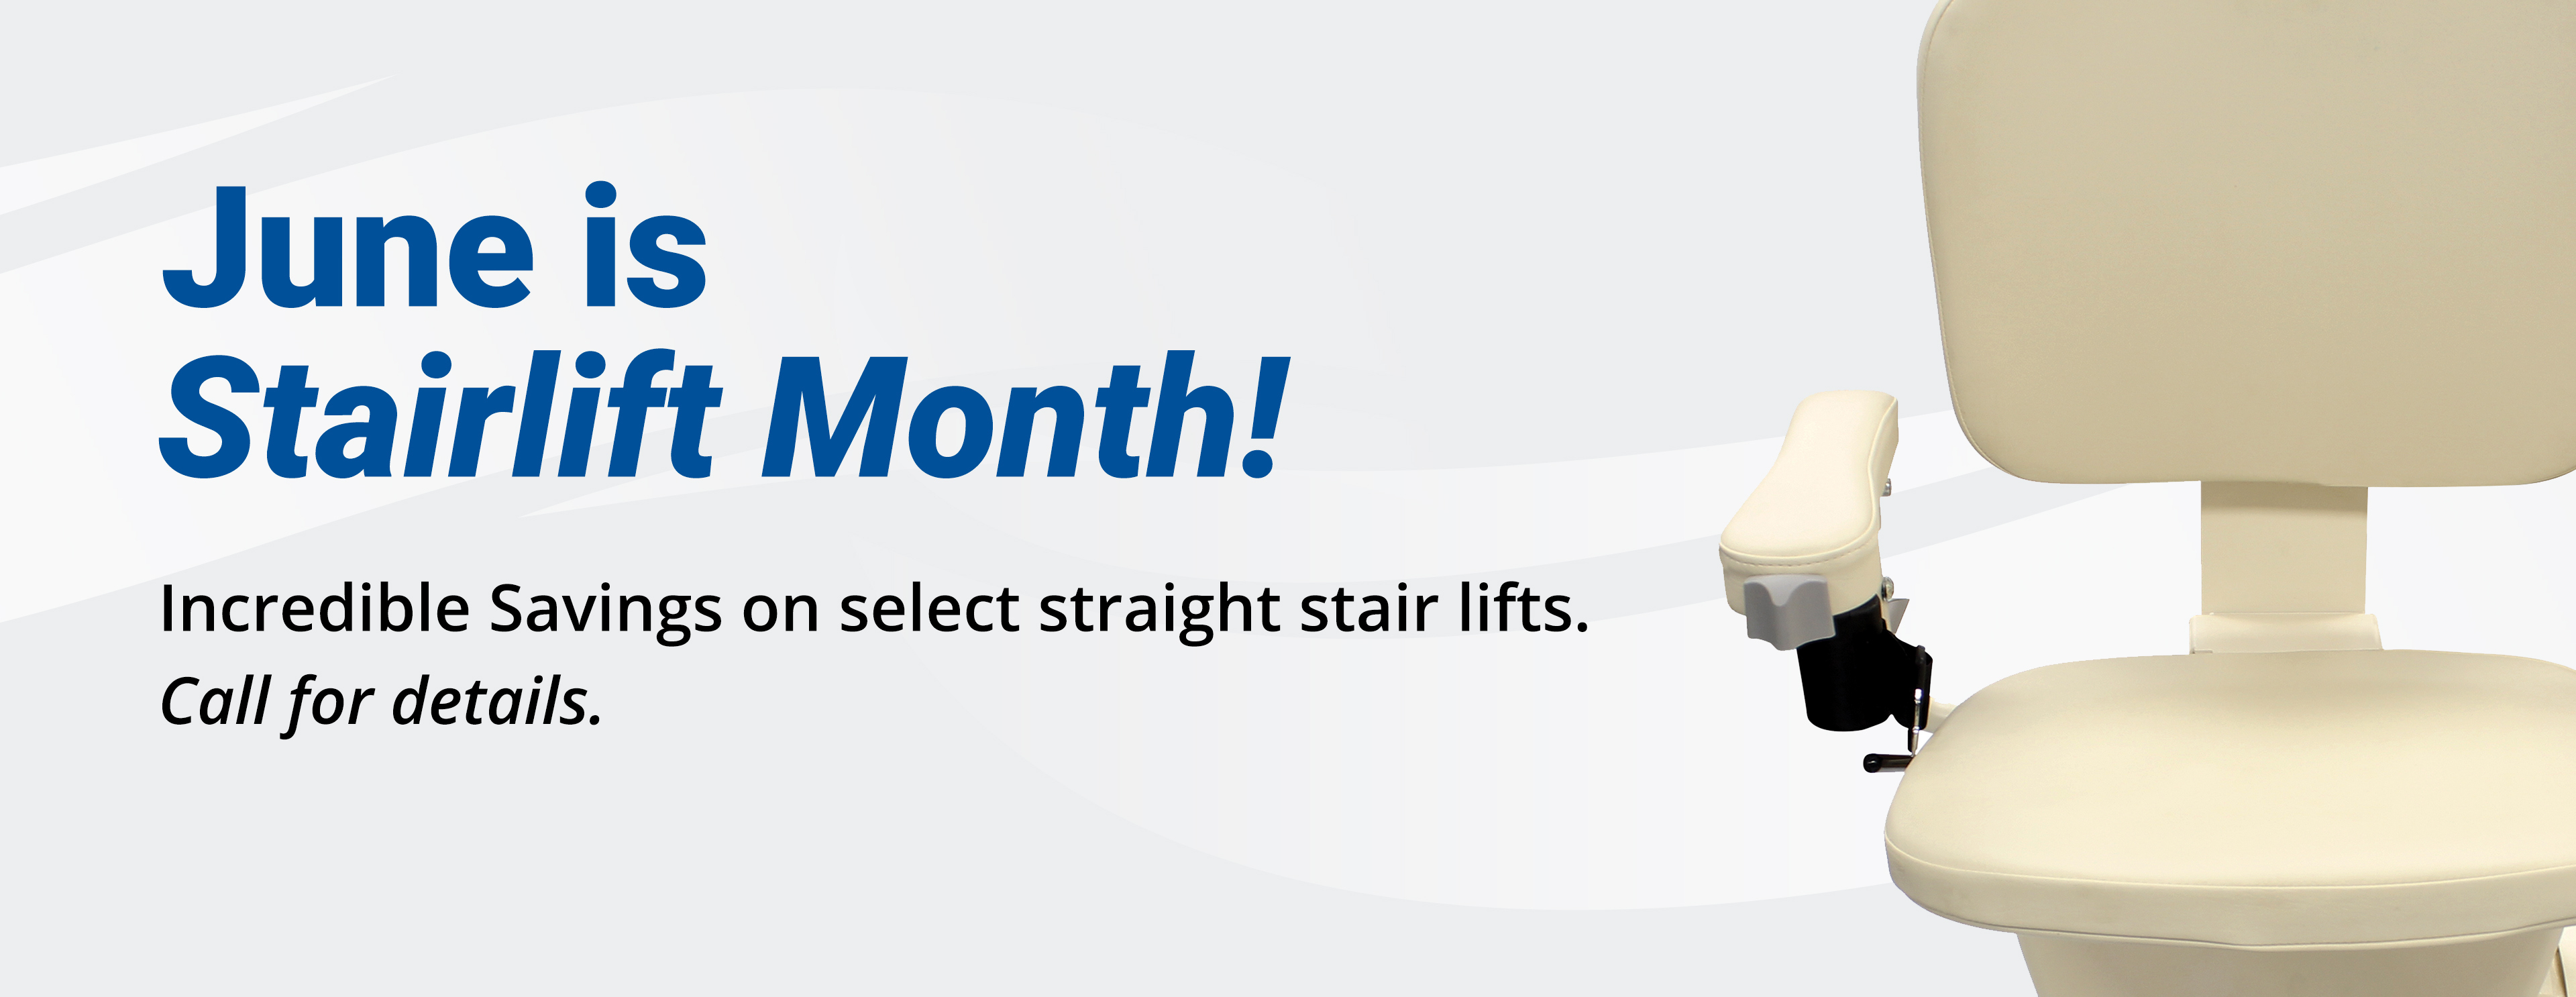 June is Stair Lift Month. Give us a call for details!